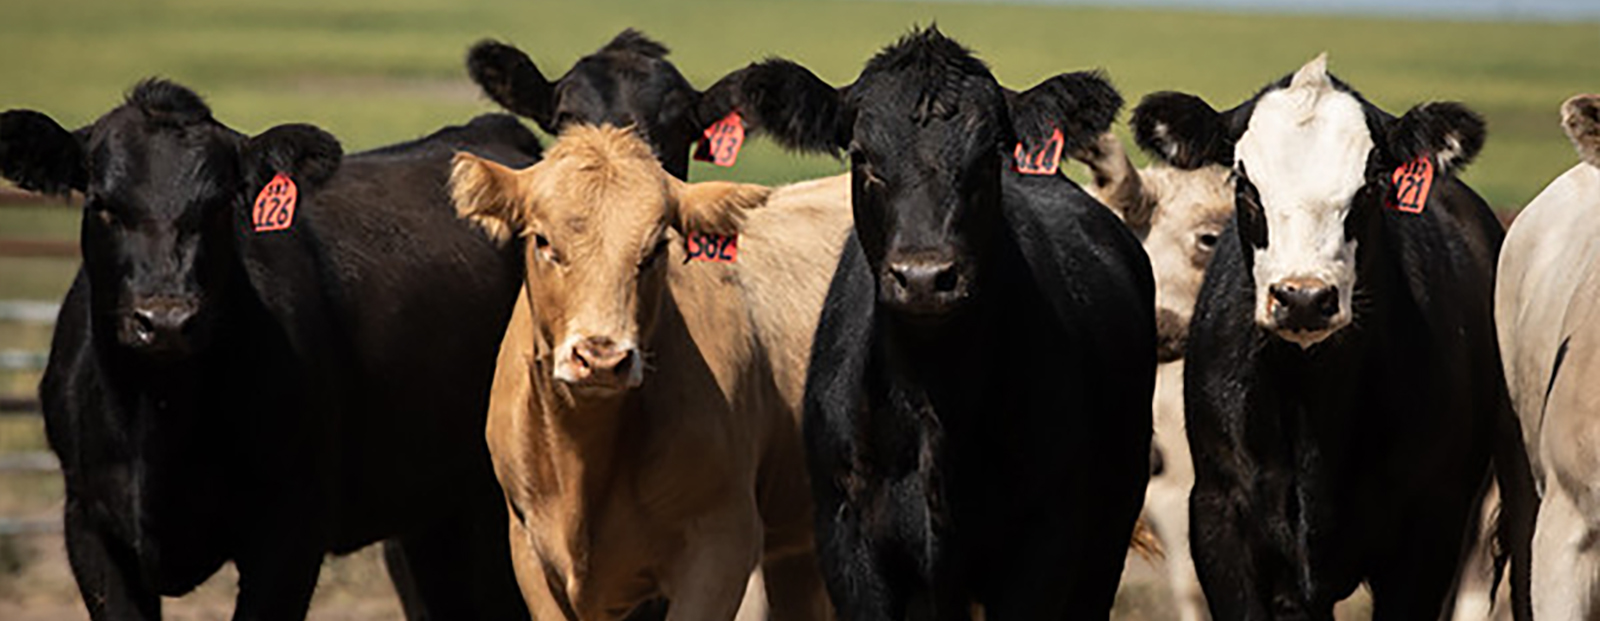 An innovative approach to feedlot management of BRD in cattle.